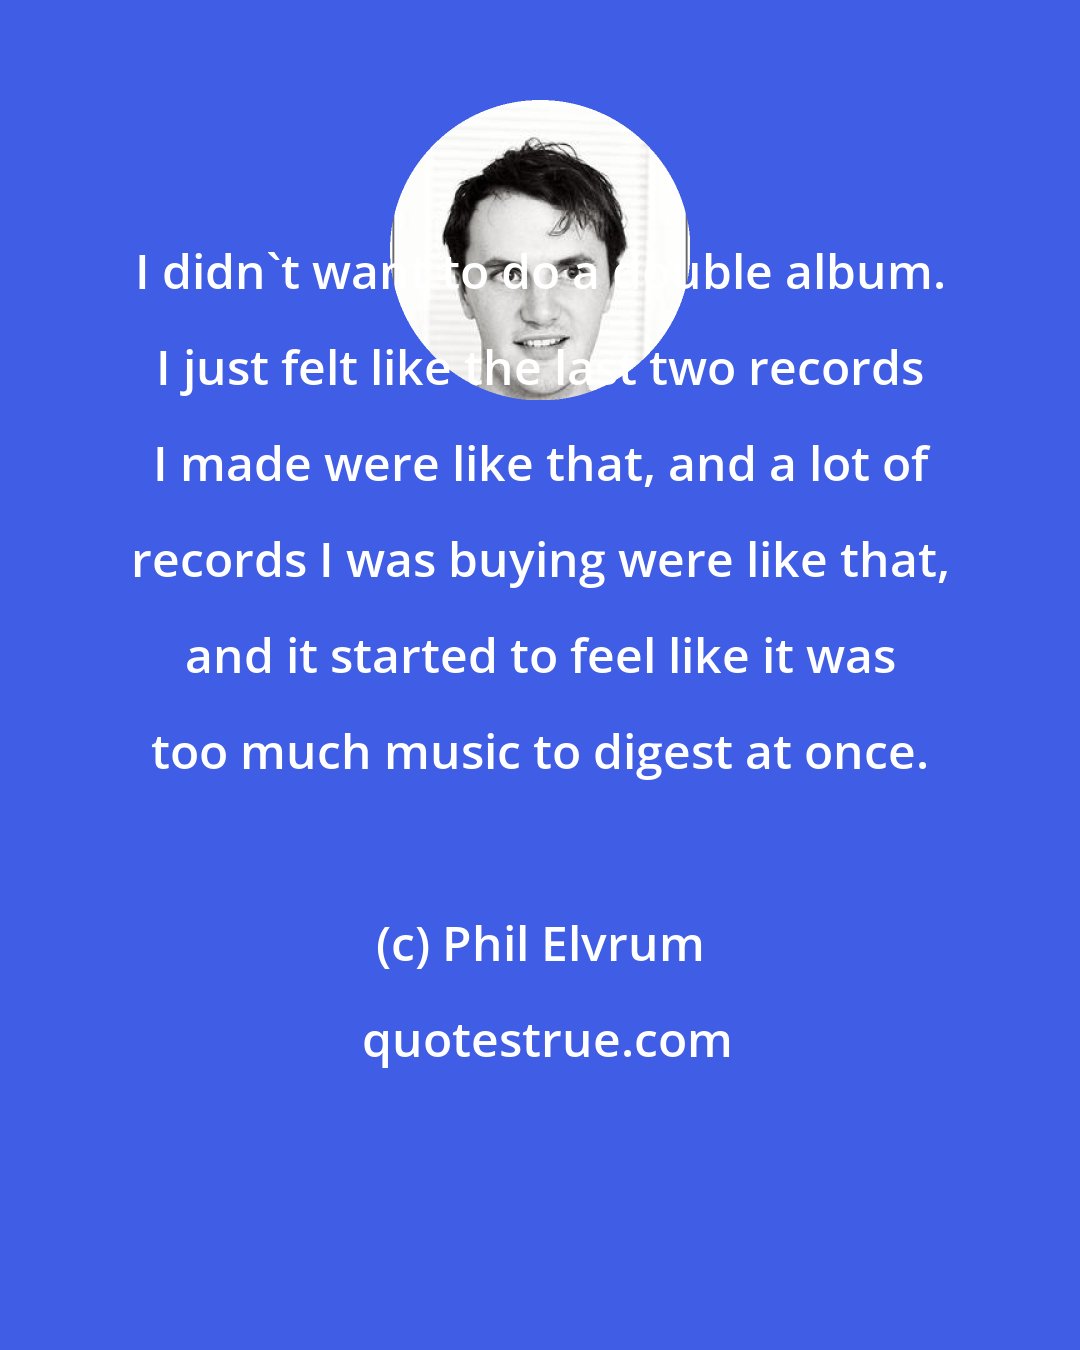 Phil Elvrum: I didn't want to do a double album. I just felt like the last two records I made were like that, and a lot of records I was buying were like that, and it started to feel like it was too much music to digest at once.